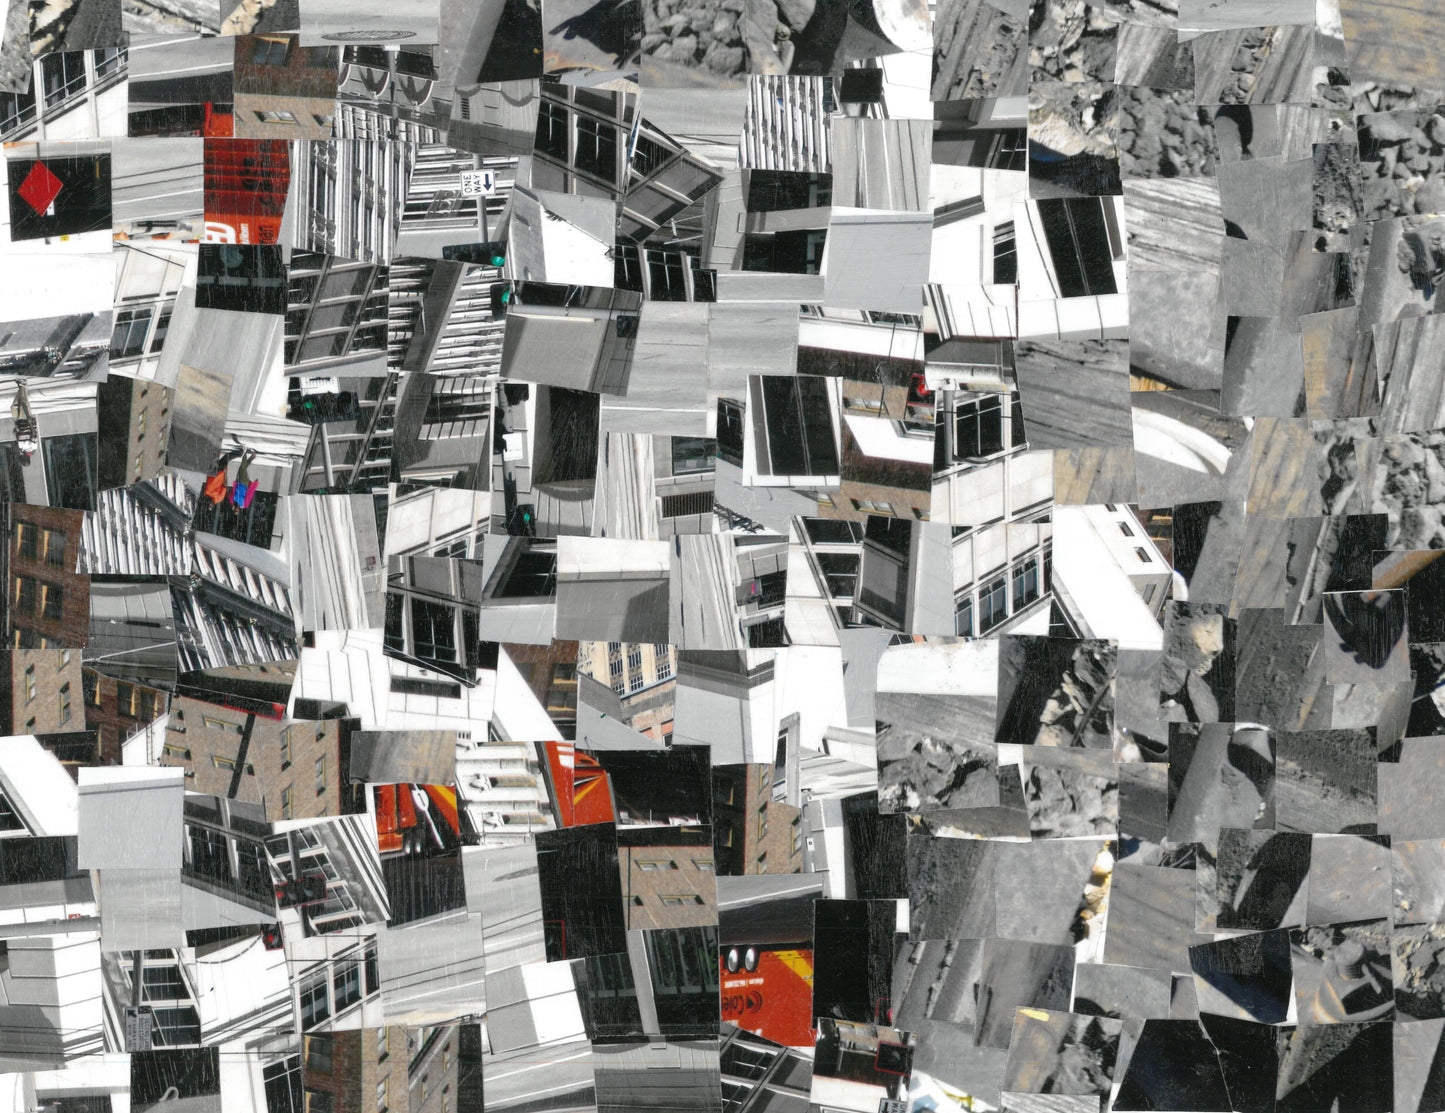 A Collage made up of rectangular cut photographs of cement buildings and sidewalks. The color scheme is grays with a few specs of orange and brown.